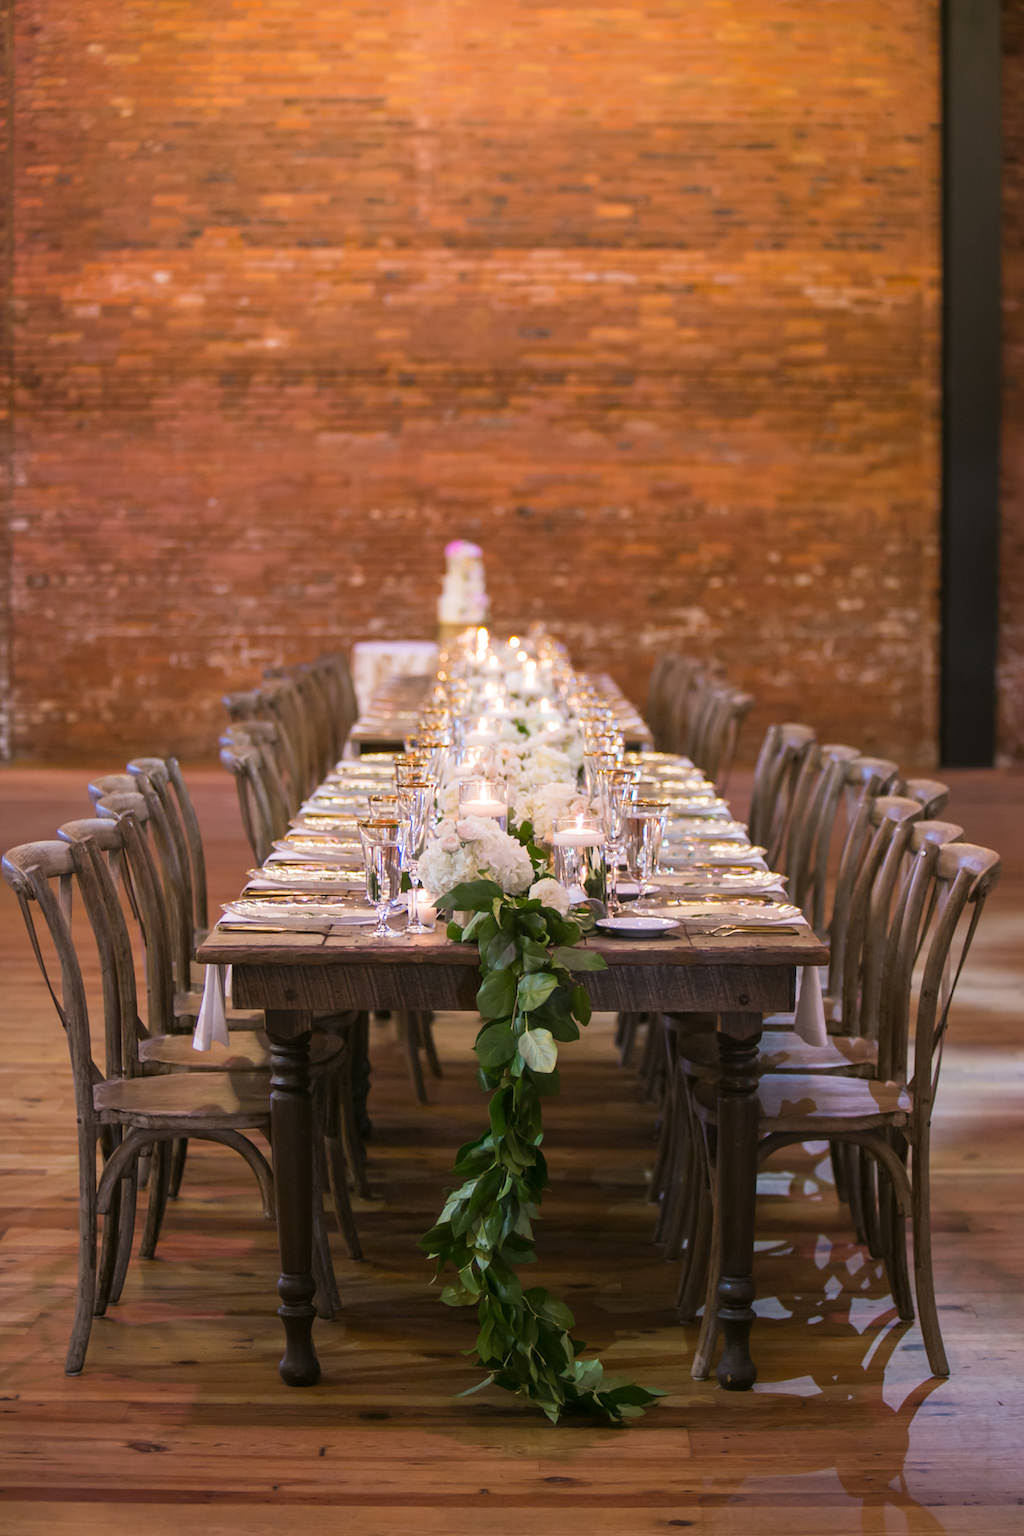 Rustic Modern Elegant Tuscan Inspired Wedding Reception Decor, Long Wooden Feasting Table with Greenery Garland, Wooden Crossback Chairs | Tampa Bay Wedding Photographer Carrie Wildes Photography | Tampa Wedding and Event Rentals by Kate Ryan Event Rentals | Industrial Tampa Wedding Venue Armature Works